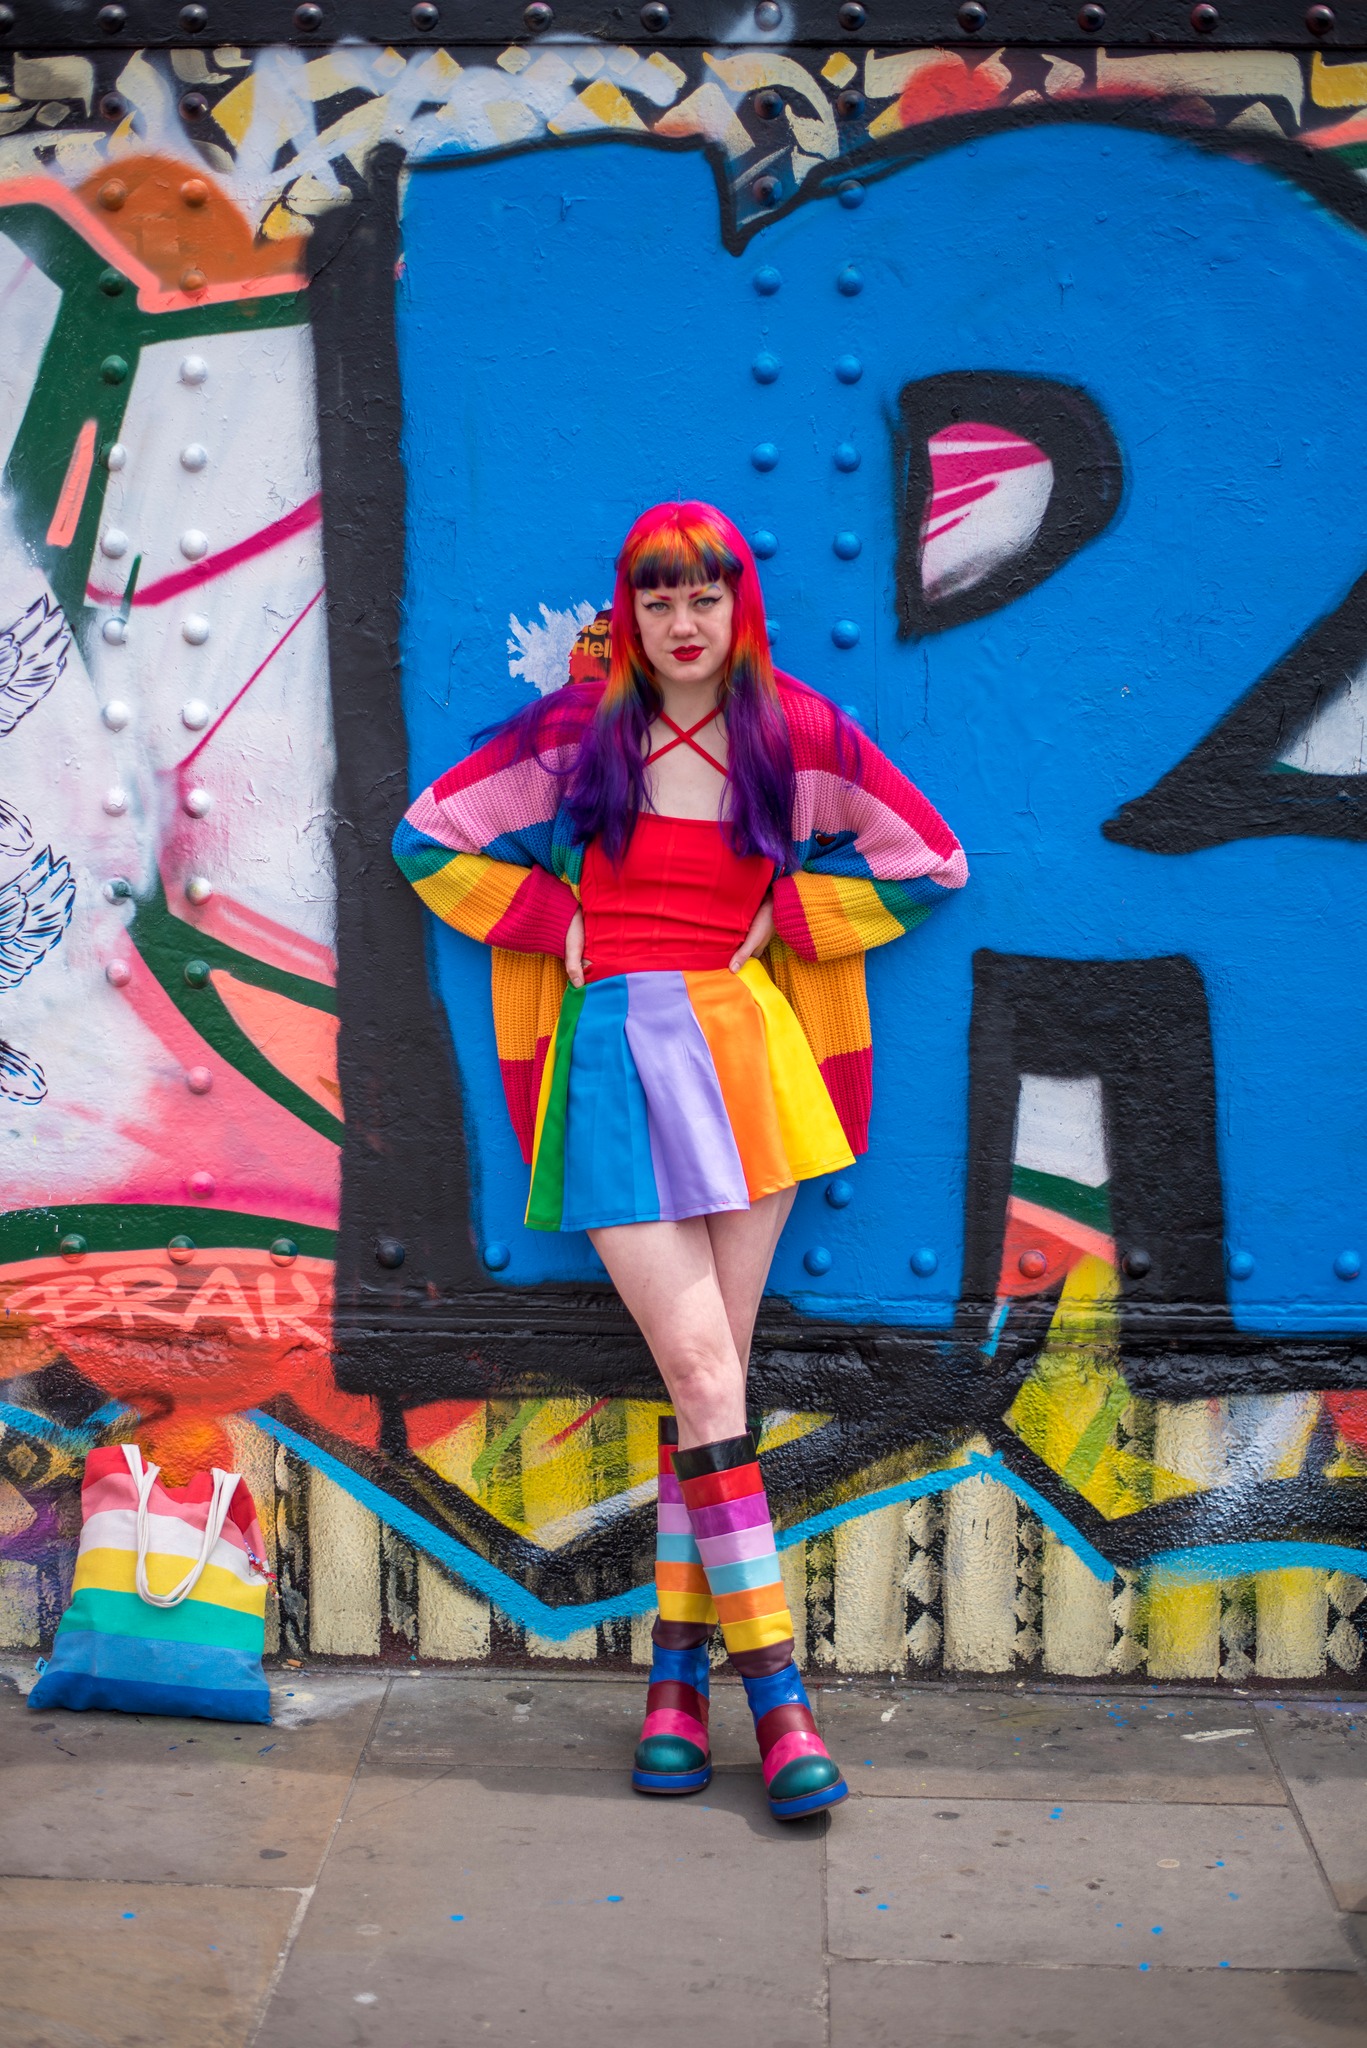 Grace has rainbow hair and wears a rainbow skirt and boots standing against a colourful wall